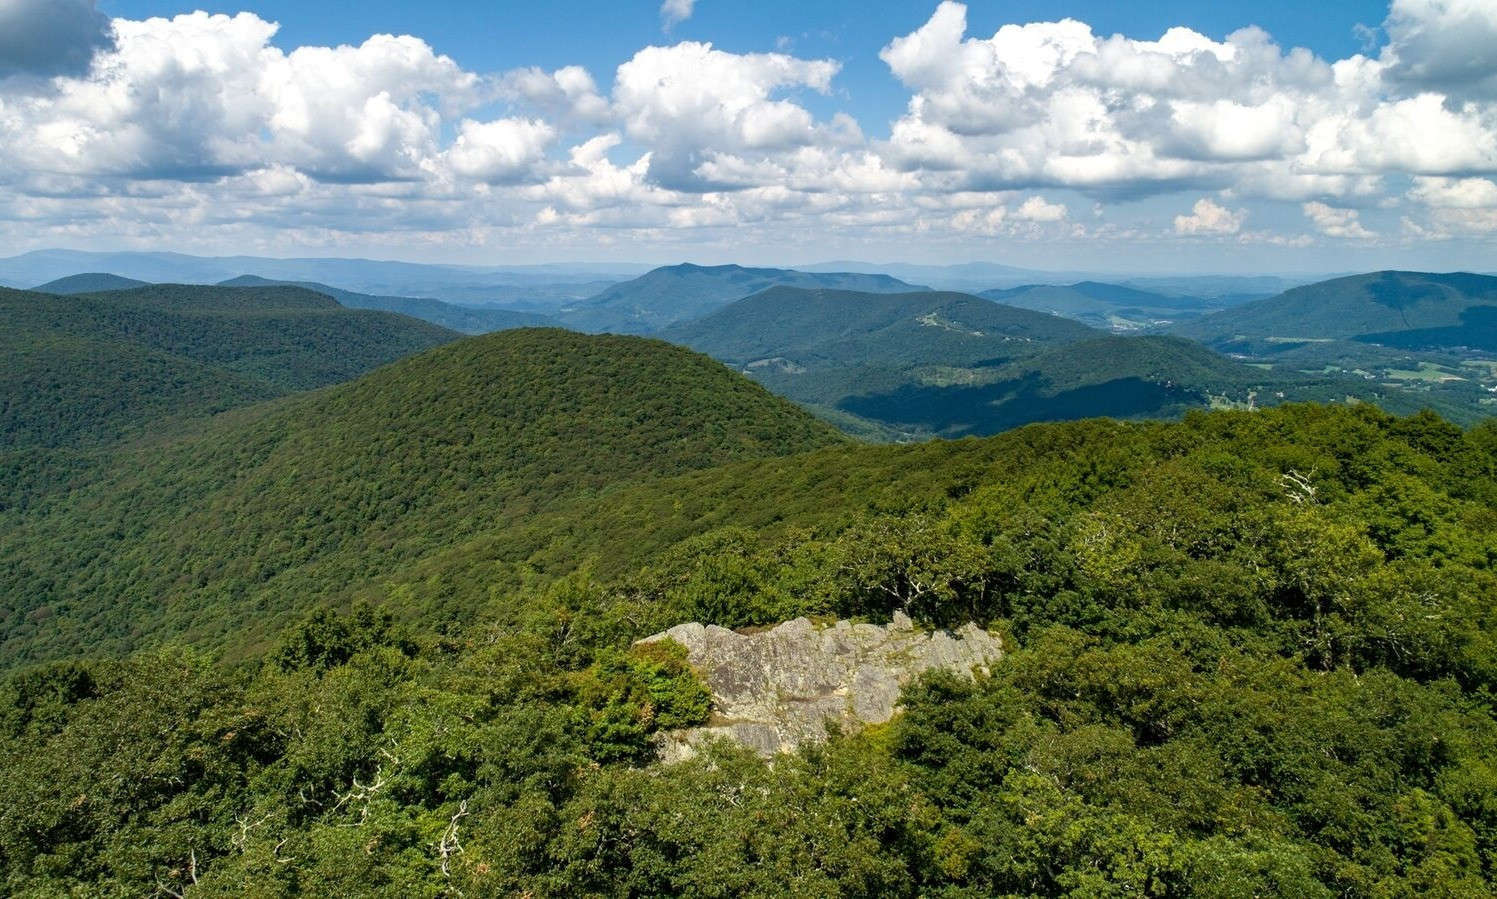 Own the highest point on Bald Mountain! This 11-acre tract has long been called "The Pinnacle" because it is a true mountain top. This exceptional property boasts one of the highest peaks in Ashe County, NC and towers over the communities of Big Tree, Stonebridge and Crown Point!